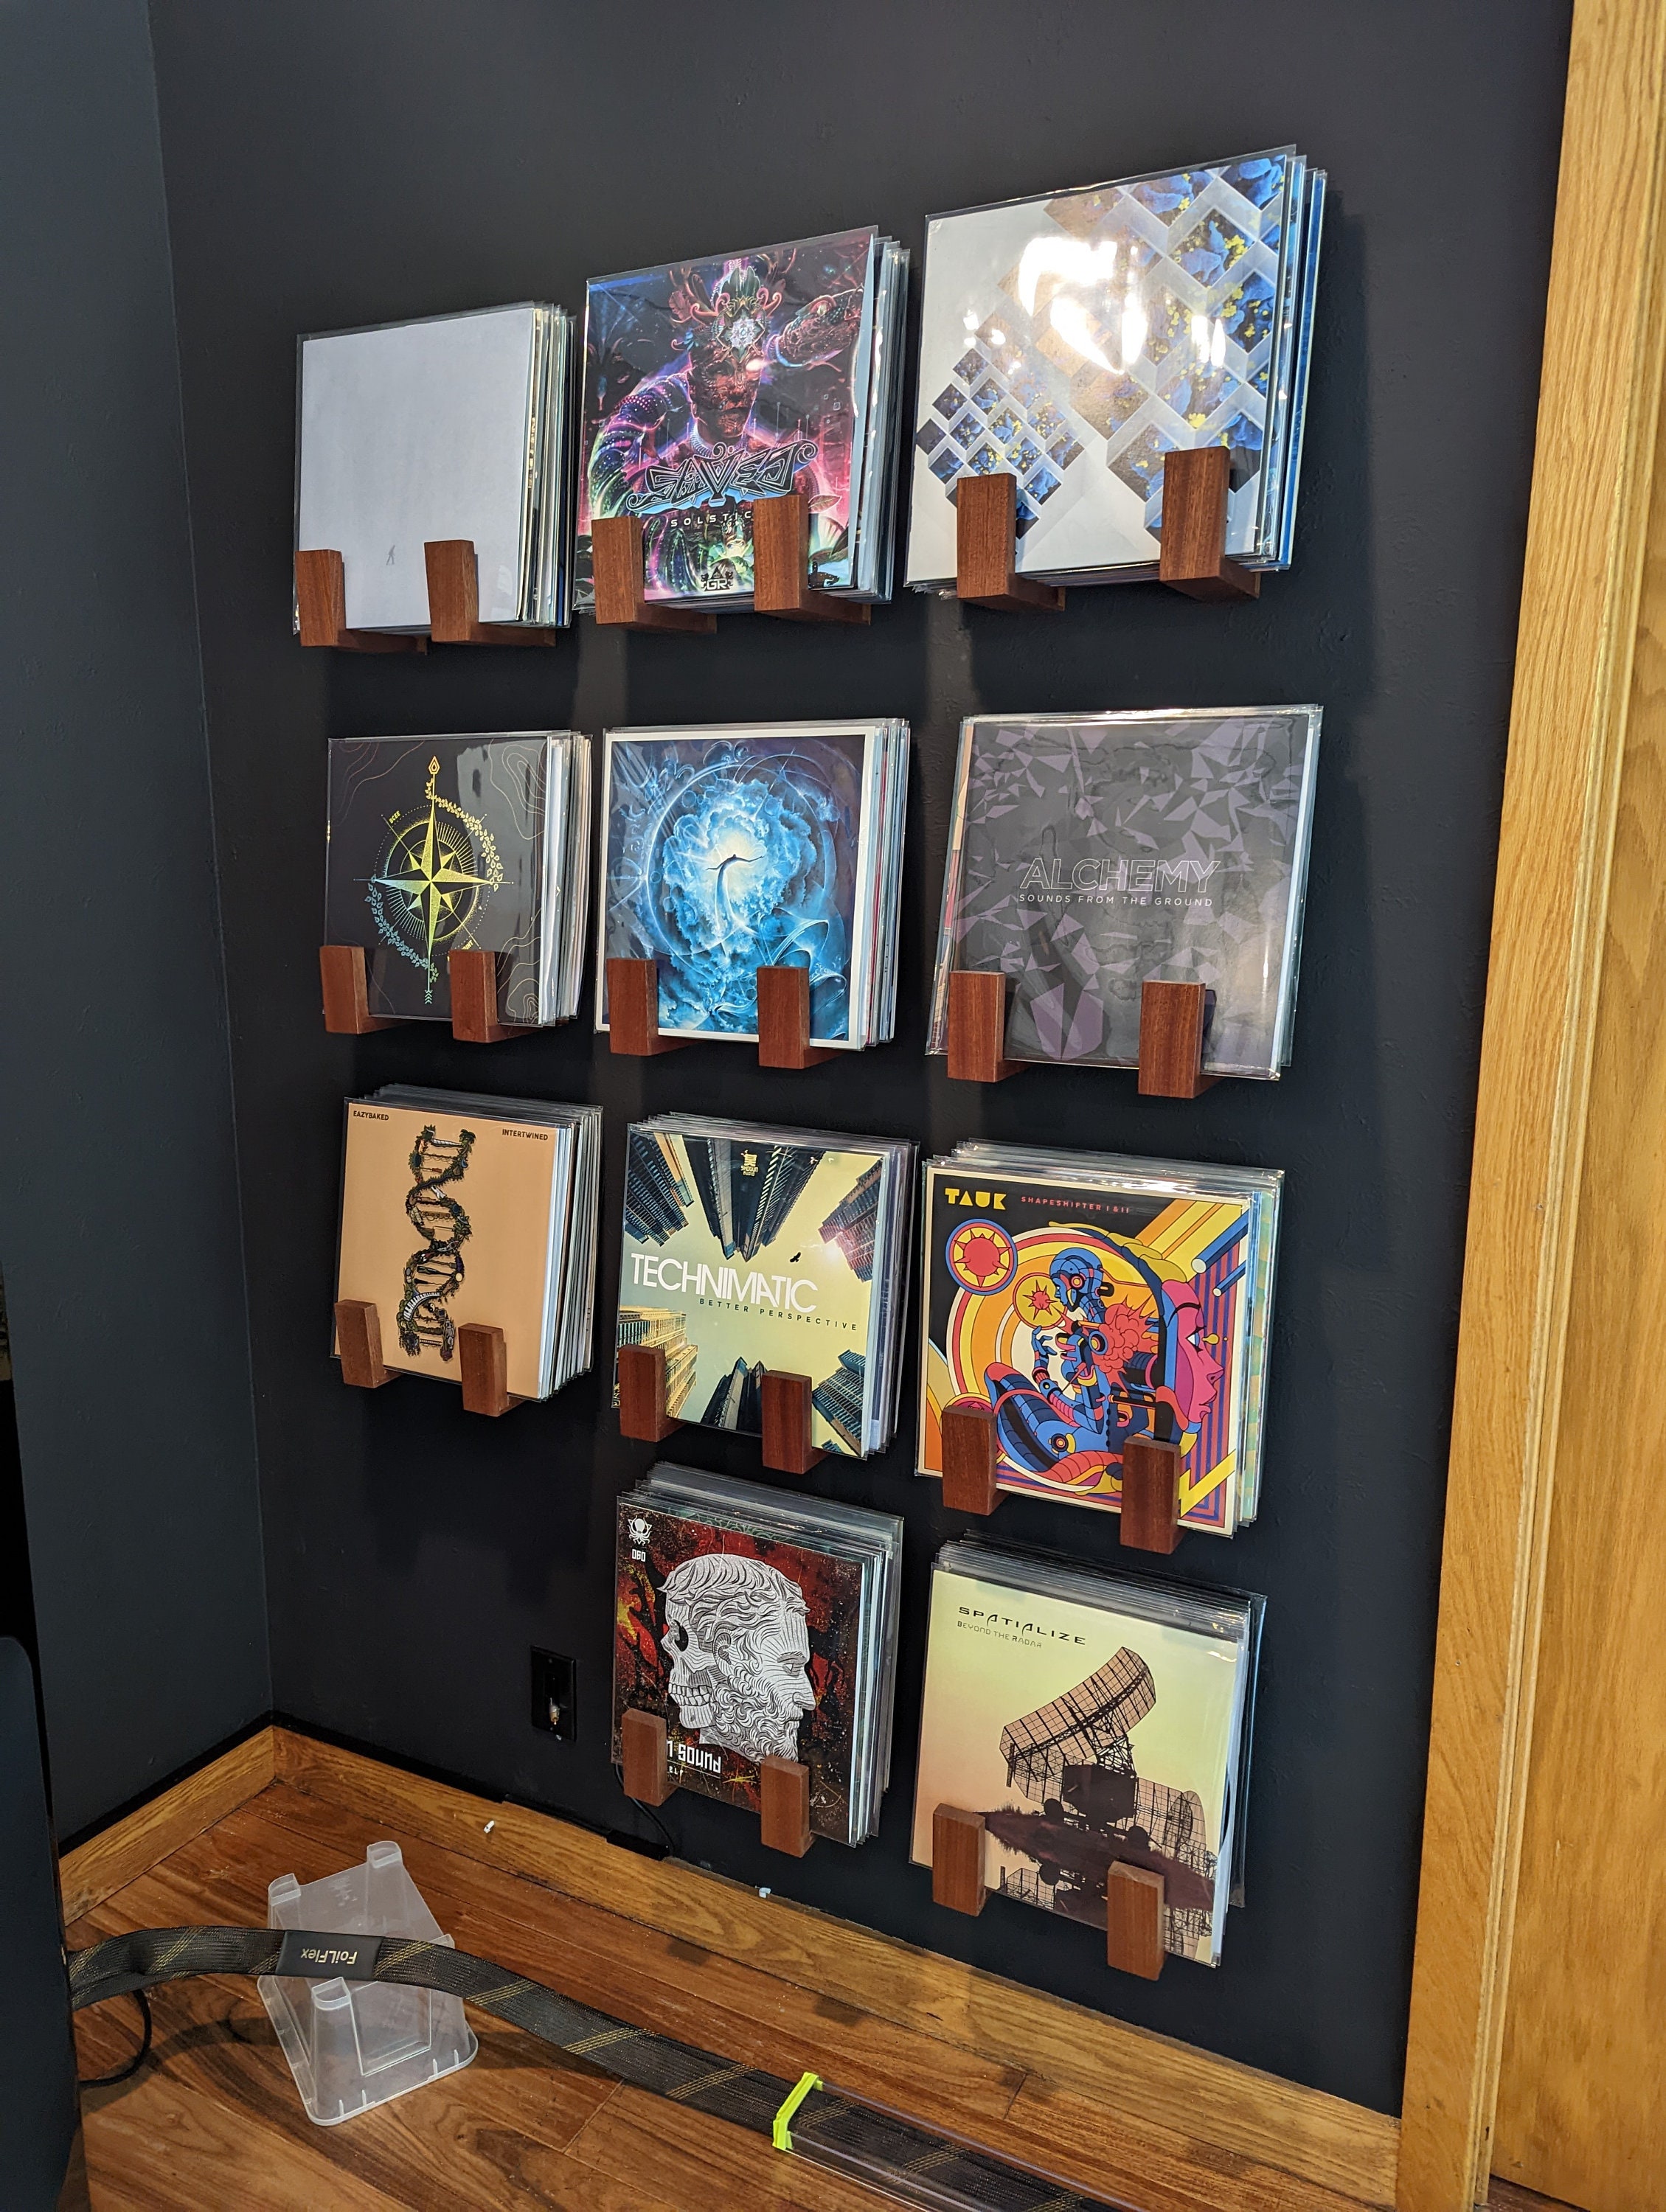 Vinyl Record Holder Wall Mounted LP Display Handcrafted From Copper Pipe  Unique Gift 